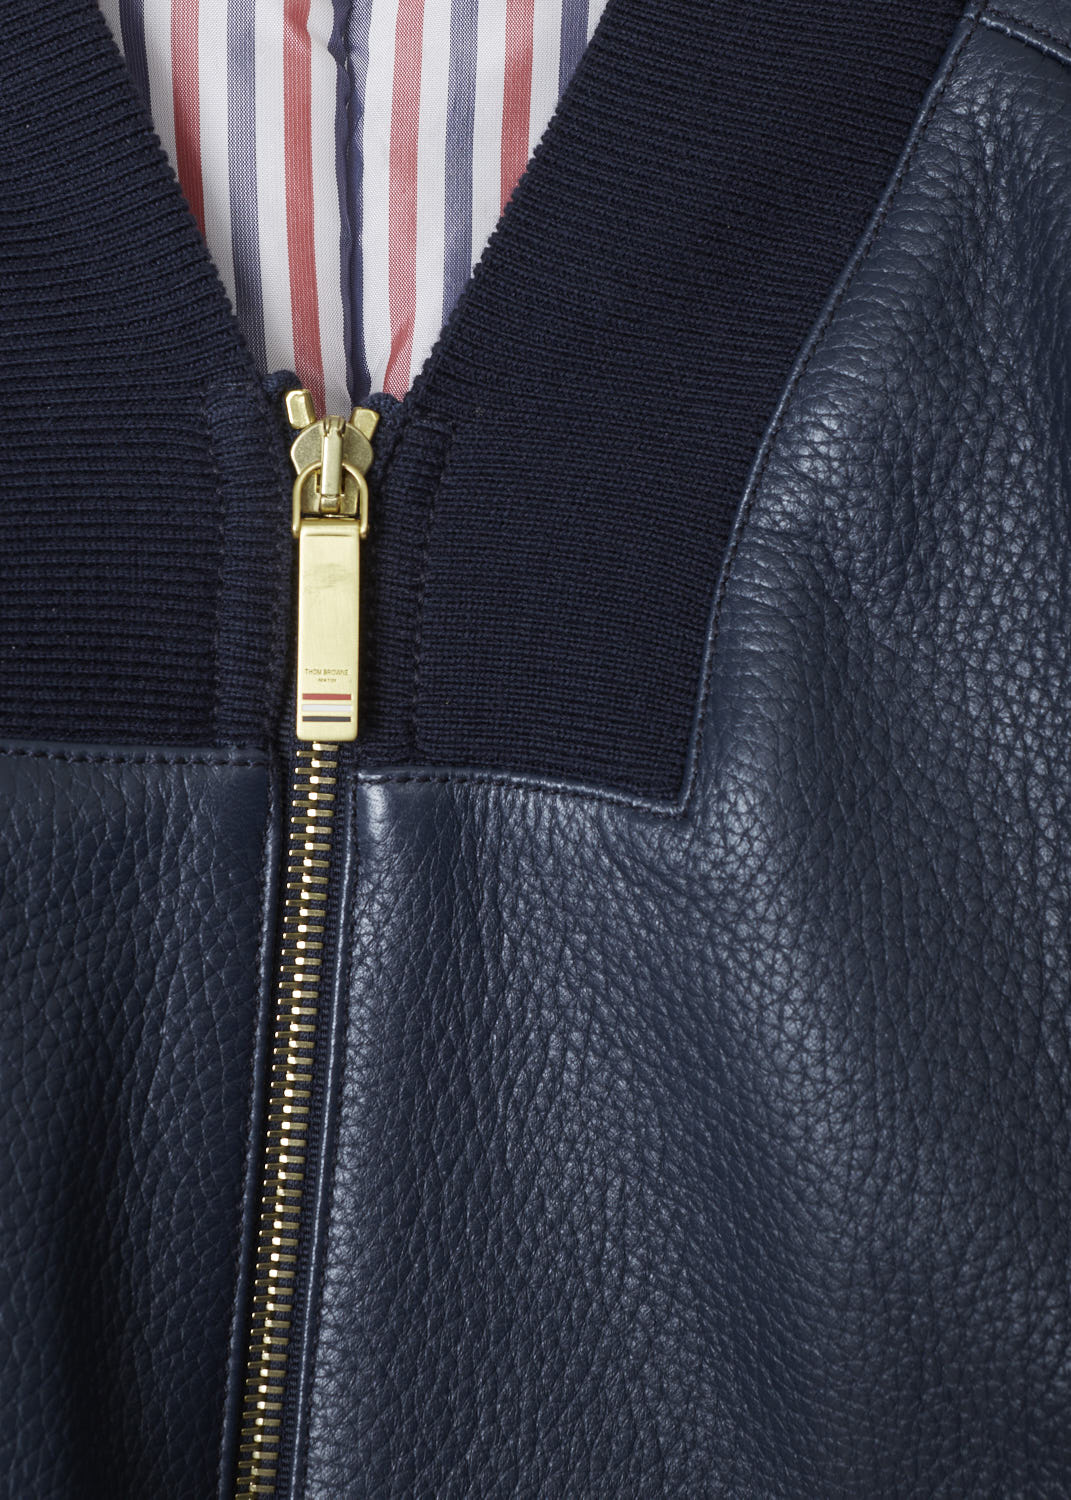 THOM BROWNE, NAVY BLUE CROPPED LEATHER JACKET, FBC276A_00713_419, Blue, Detail 1, Cropped leather jacket. This jacket has a ribbed V-neck collar. That same ribbed fabric can be found on the waistband and cuffs. Across the front, a two-way zipper can be found. A 4-bar stripe decorates the left sleeve. This jacket has two slanted pockets in the front, as well as two inner pockets. The signature tri-colored tab can be found on the back of the neck.

